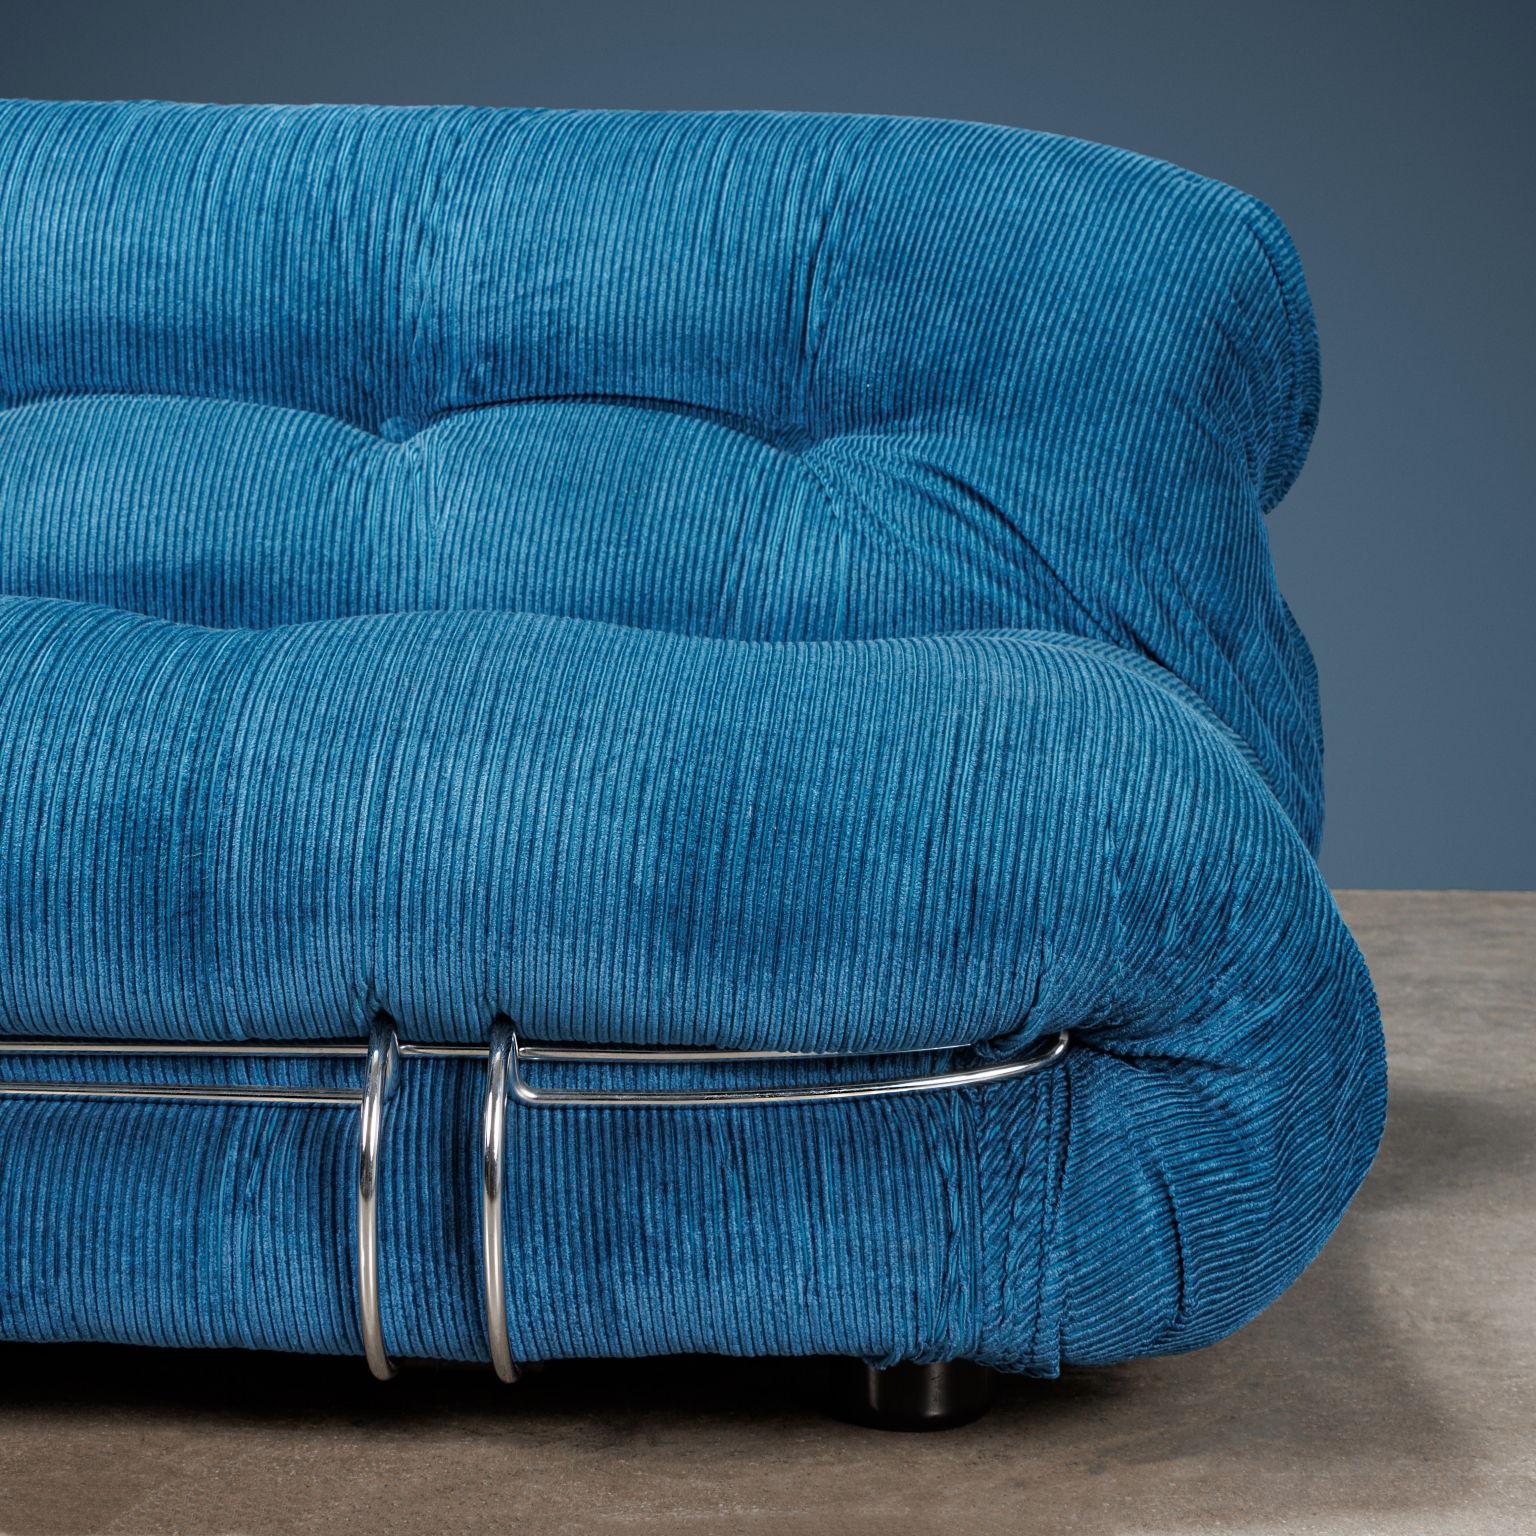 Soriana two seater sofa, designed in 1969 by Afra and Tobia Scarpa and produced by Cassina. Foam padding and velvet upholstery.